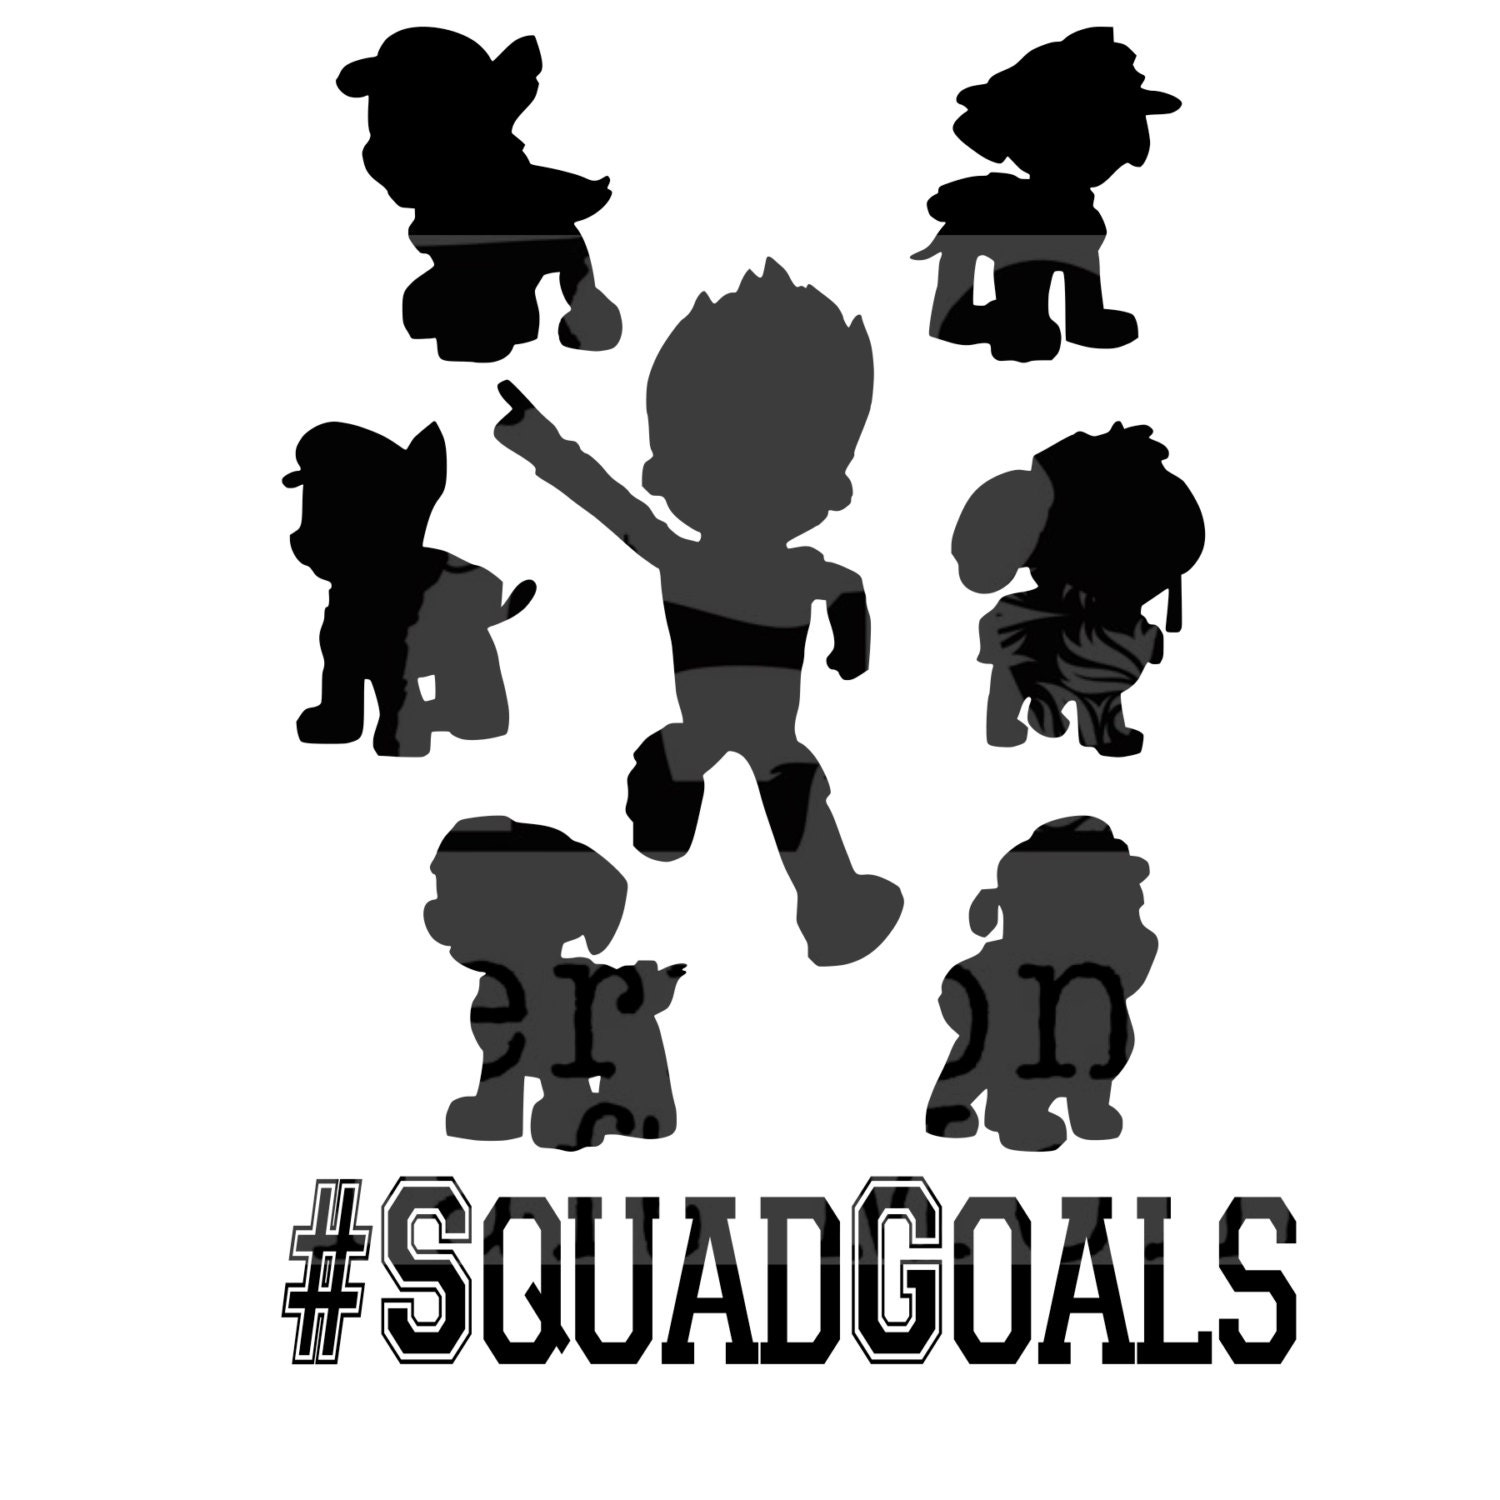 Download Paw Patrol Squad Goals Cut File. .svg Ryder Chase Marshall